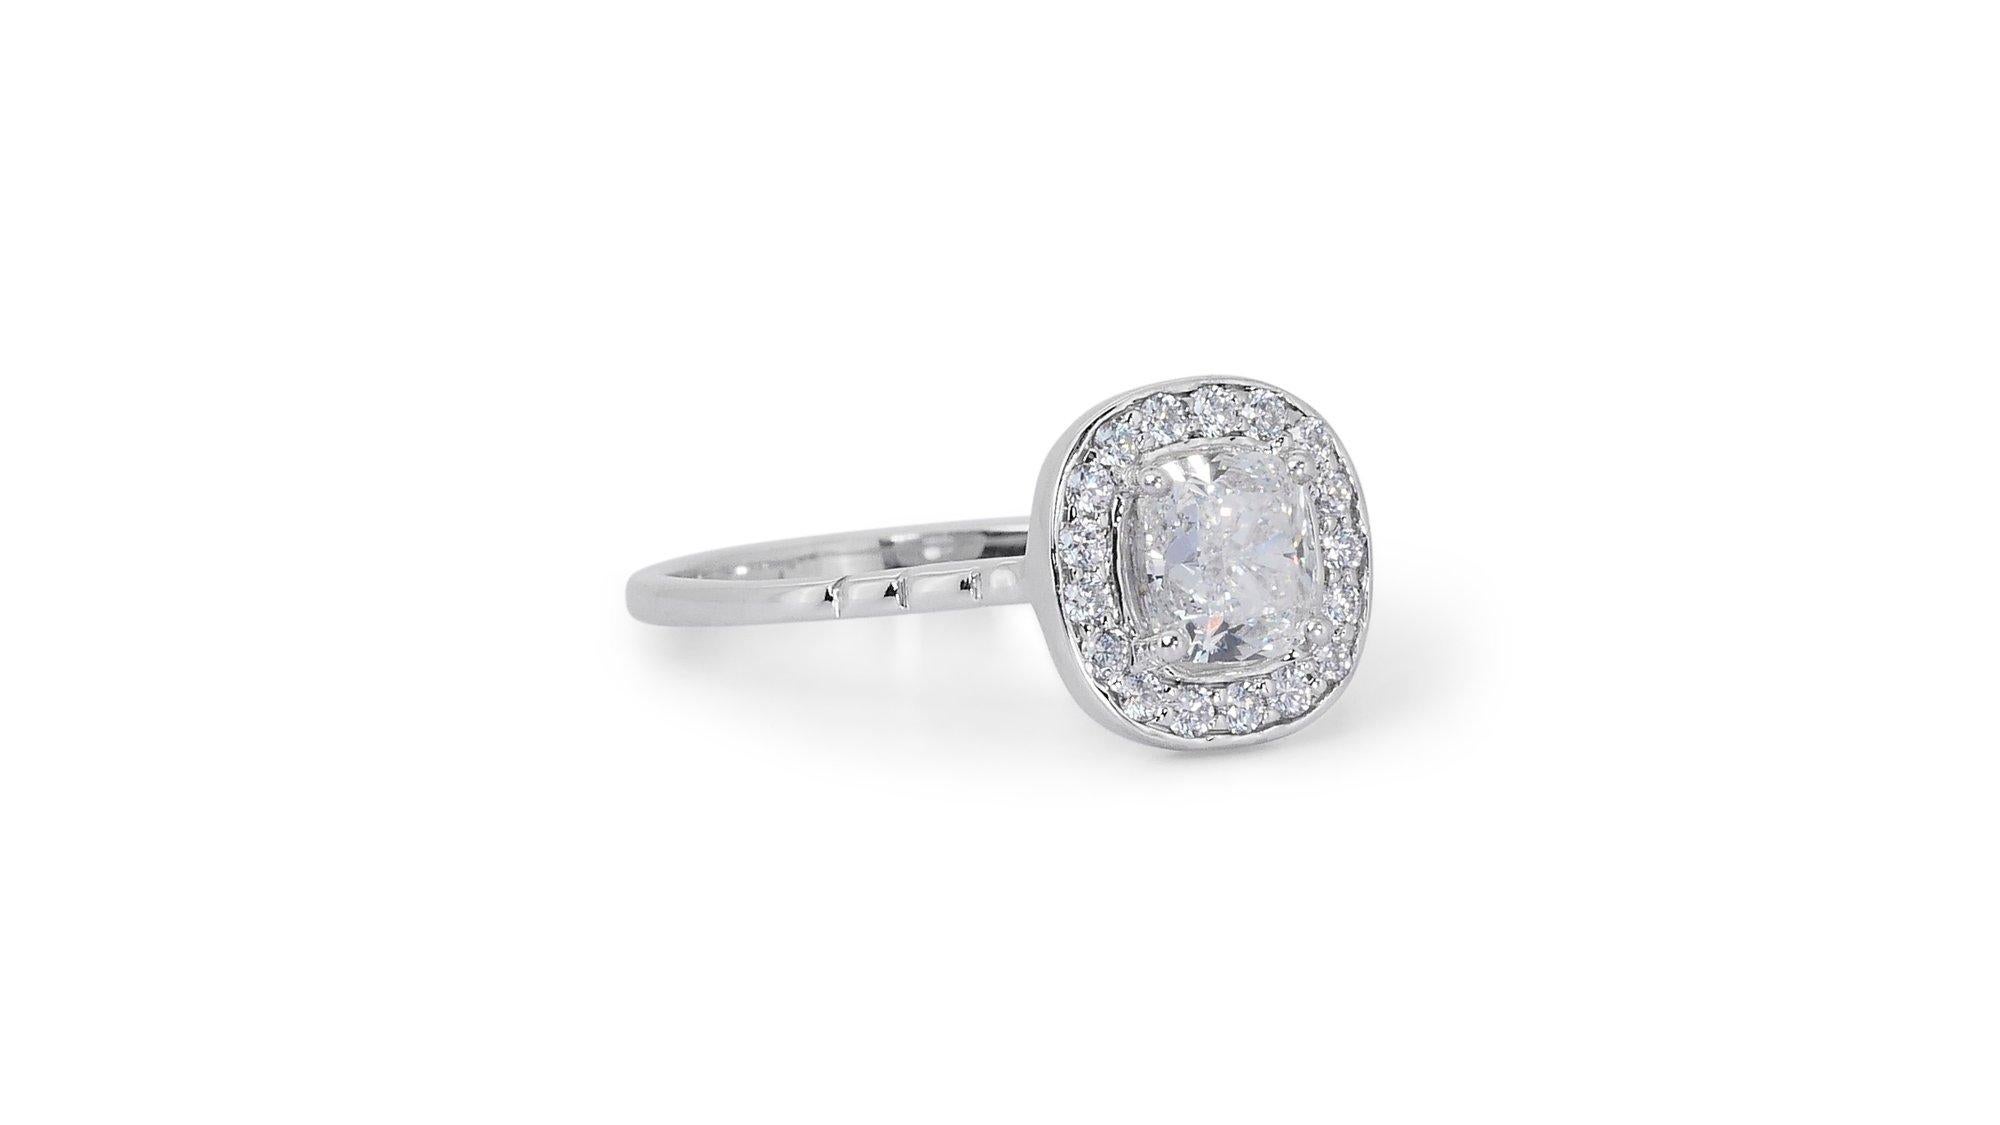 Elegant 1.17ct Diamonds Halo Ring in 18k White Gold - GIA Certified

Embrace the allure of pure elegance with this sophisticated 18k white gold diamond halo ring, centered around a flawless 1.00-carat cushion-cut diamond. Complementing the main